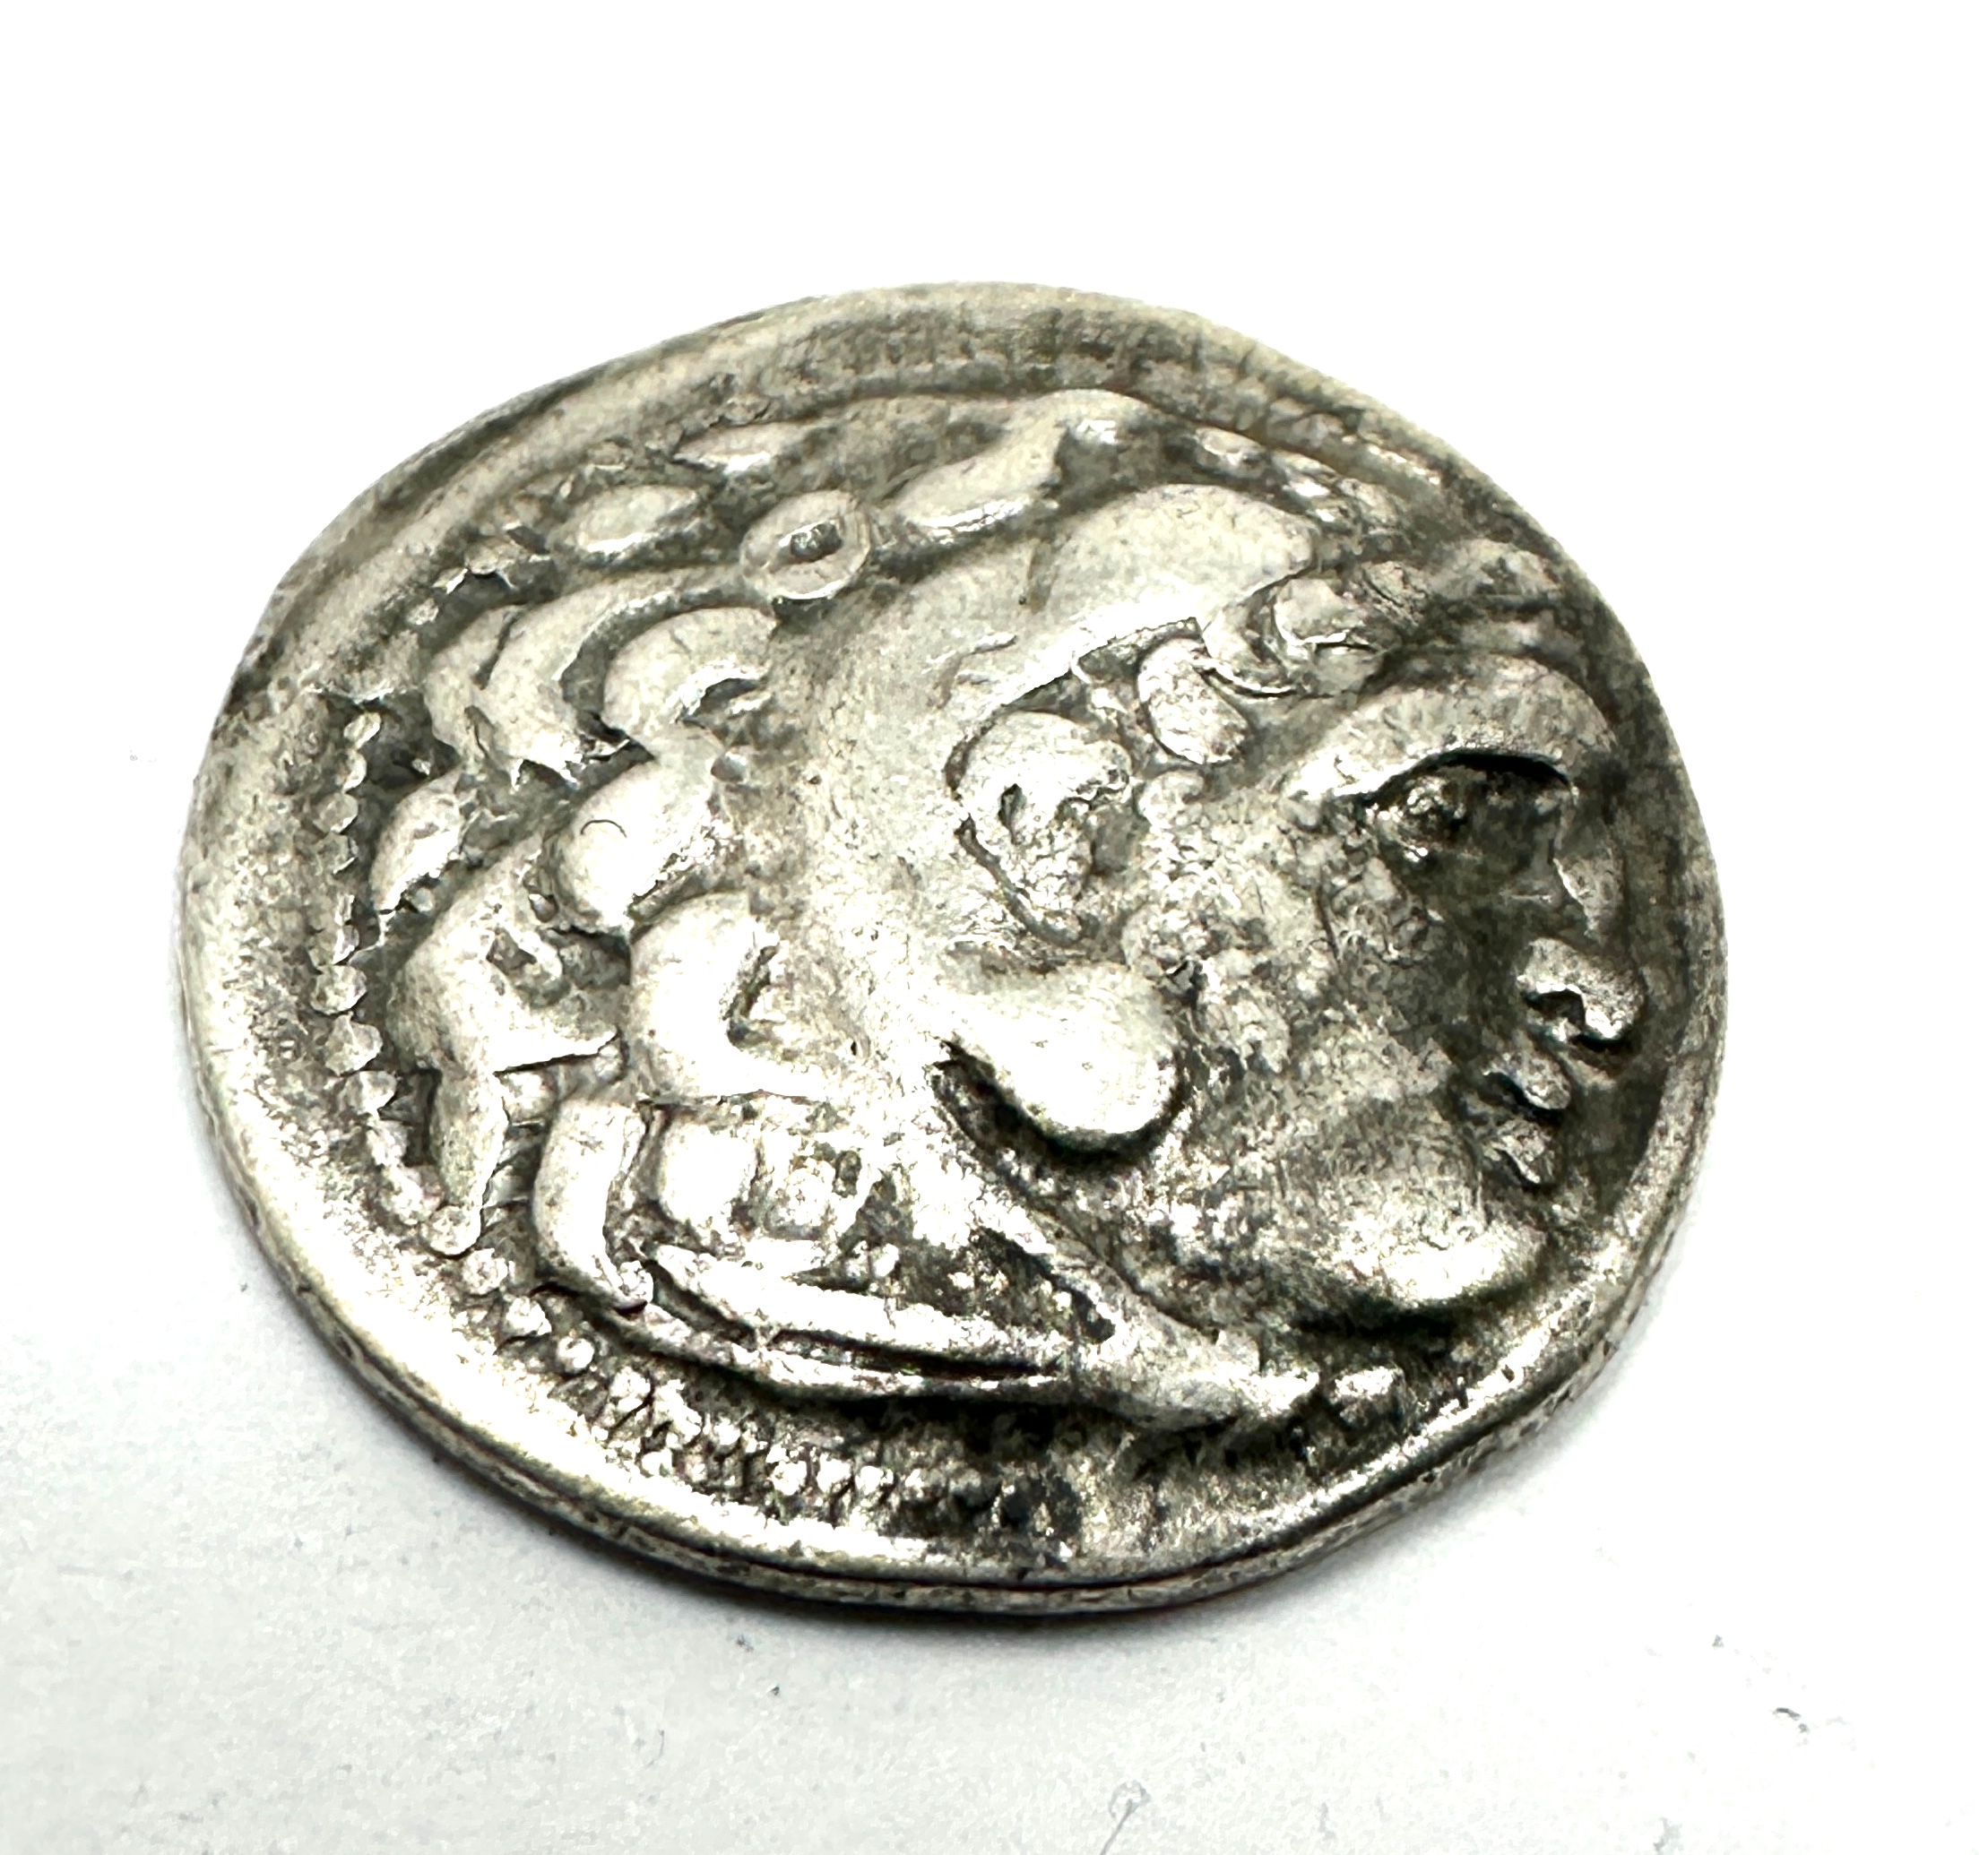 Silver drachm coin minted by Alexander the Great (336-323 BC). Obverse: Alexander as Herakles